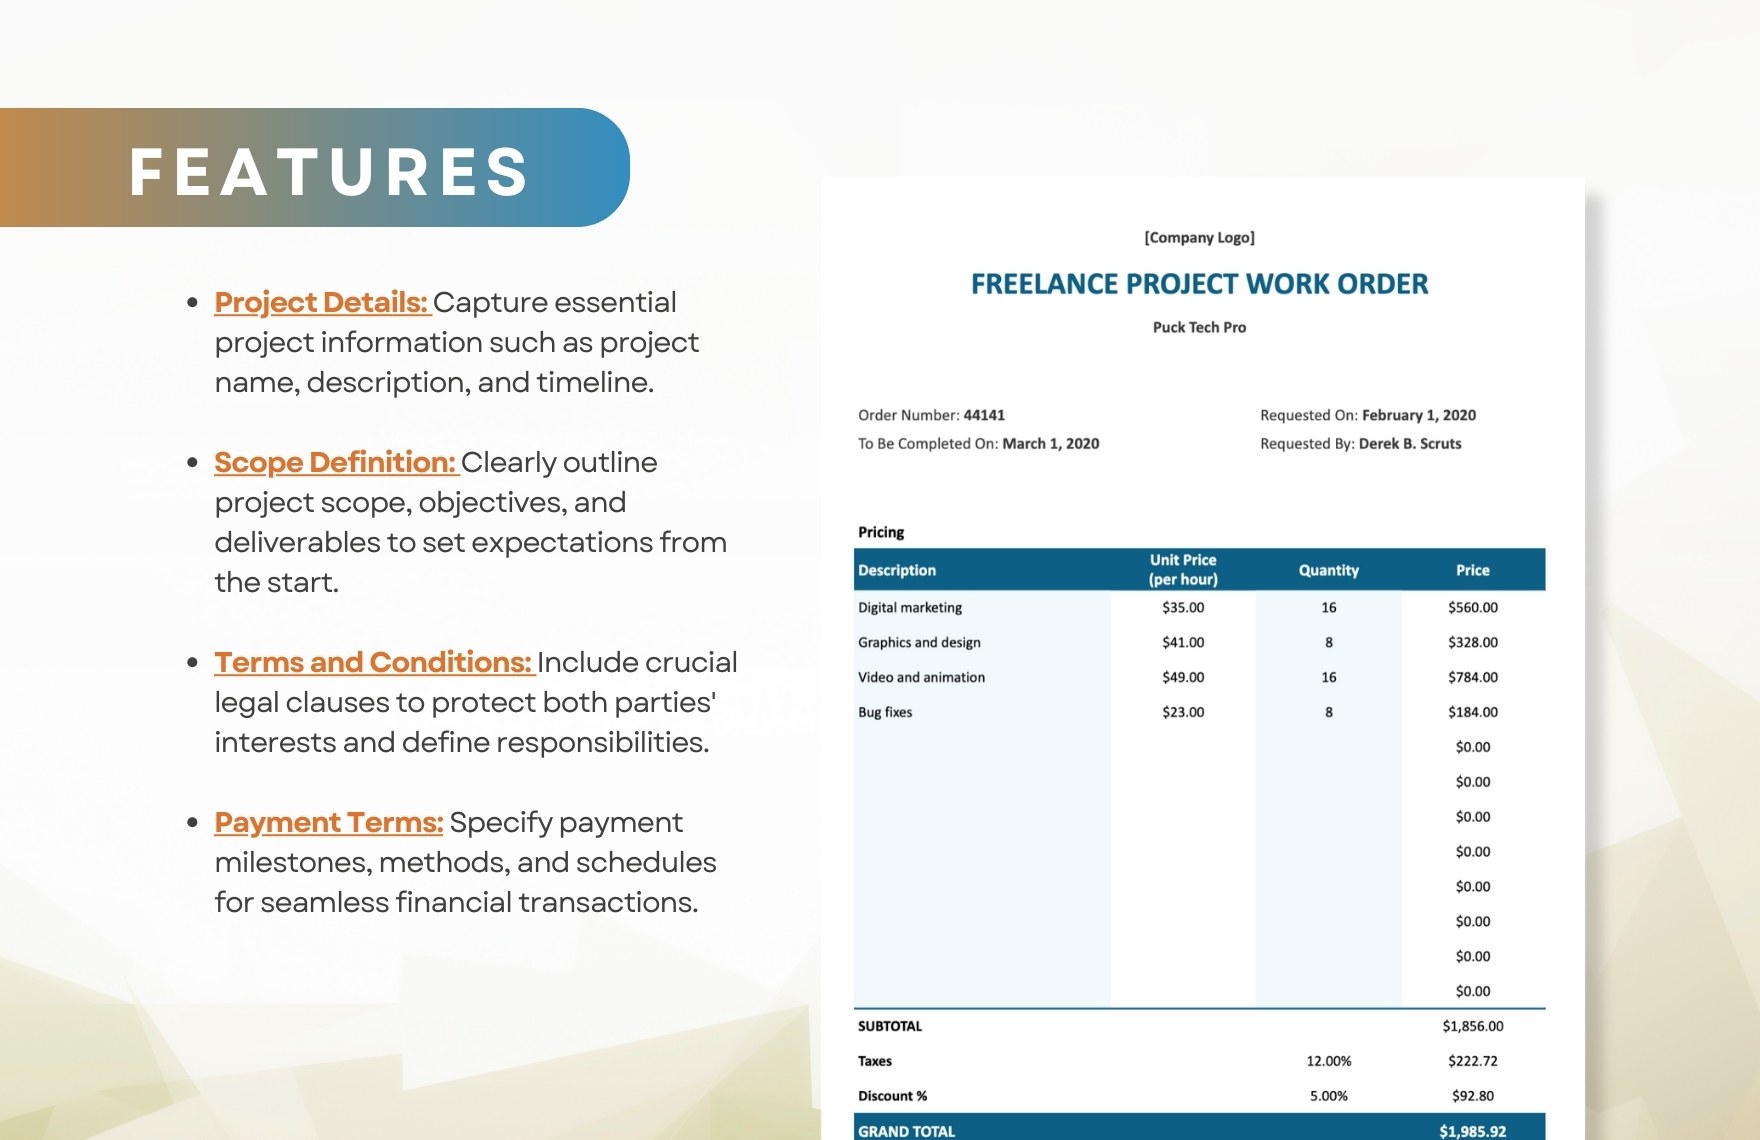 Freelance Project Order Template